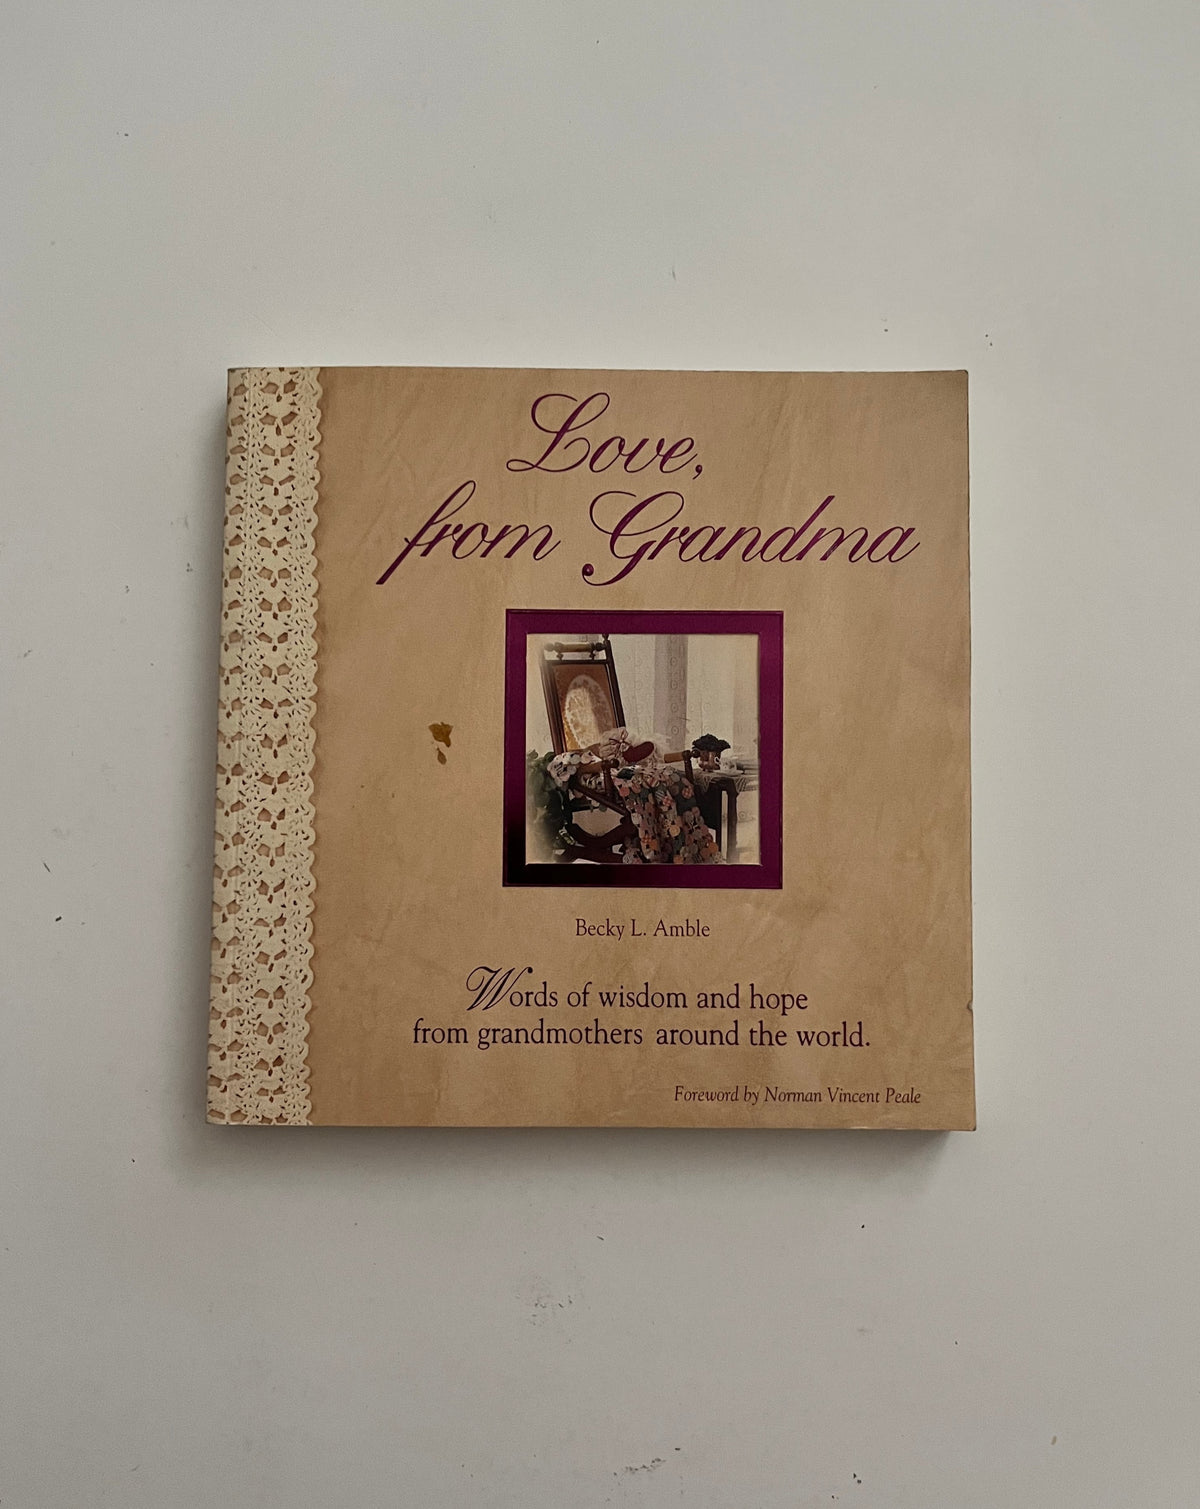 DONATE: Love, From Grandma: Words of Wisdom and Hope from Grandmothers Around the World edited by Becky L. Amble